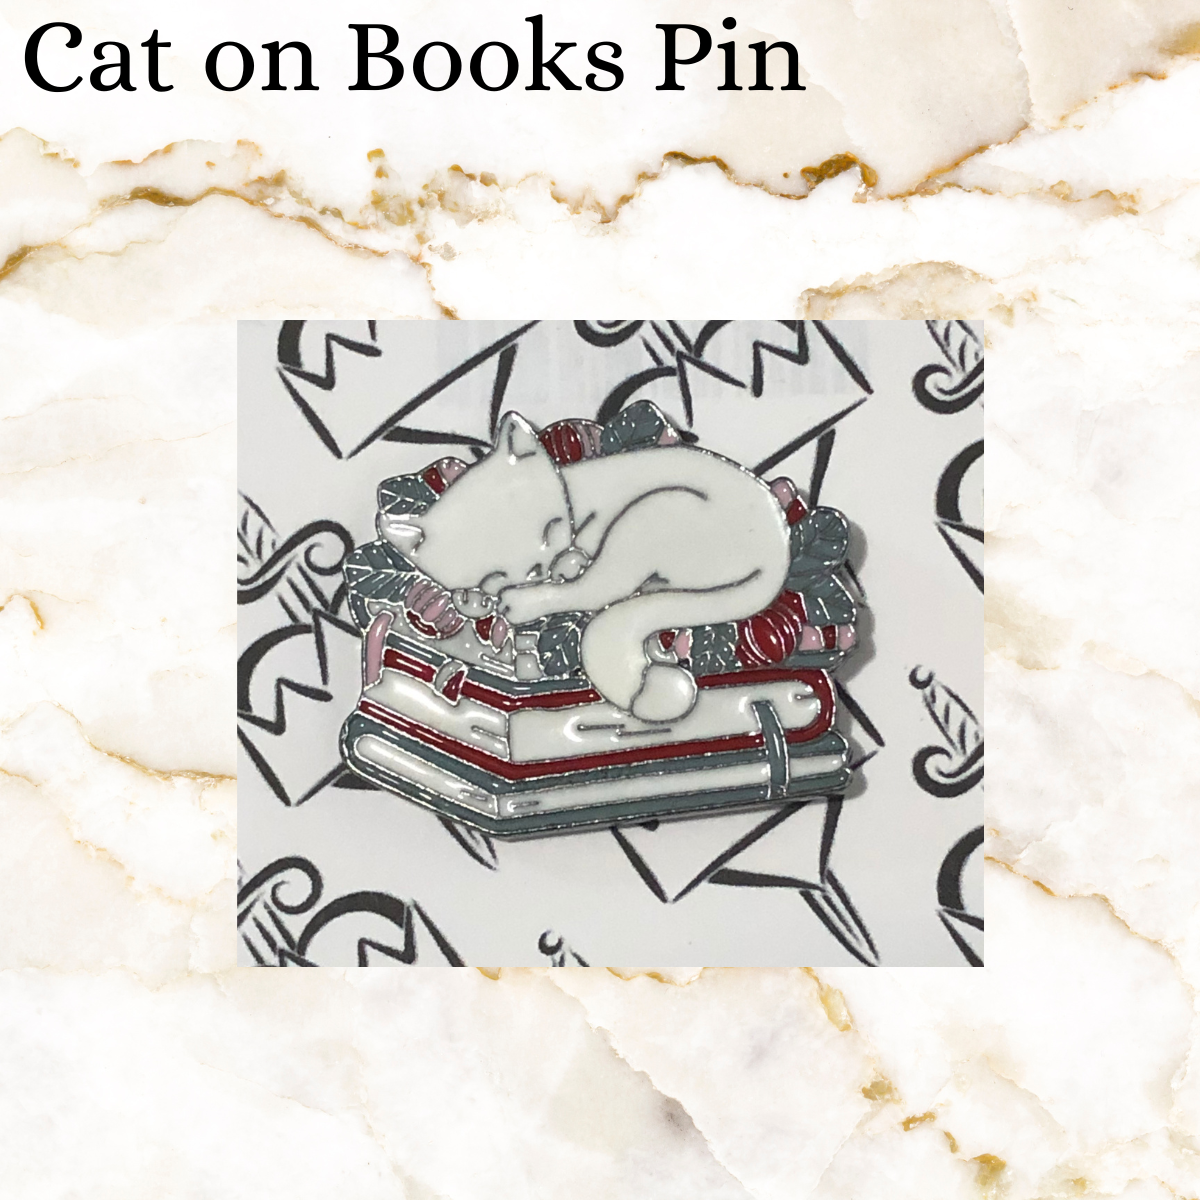 Book pin - white cat sleeping on flowers on a stack of 2 books -  red, grey and white colours